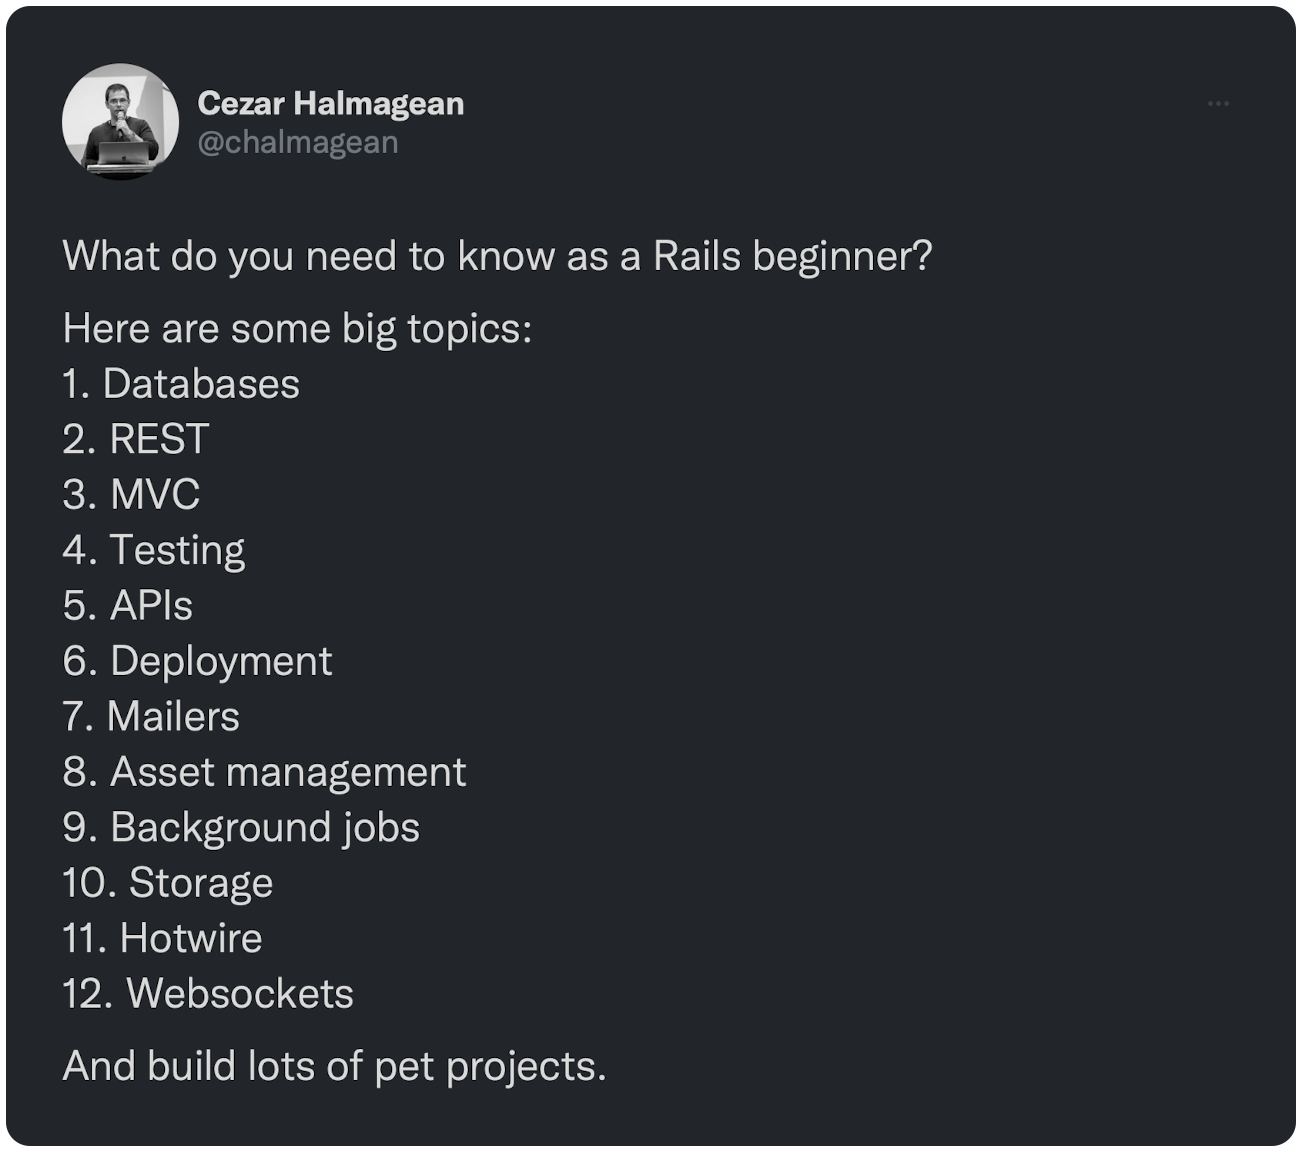 What do you need to know as a Rails beginner? Here are some big topics: 1. Databases 2. REST 3. MVC 4. Testing 5. APIs 6. Deployment 7. Mailers 8. Asset management 9. Background jobs 10. Storage 11. Hotwire 12. Websockets And build lots of pet projects.